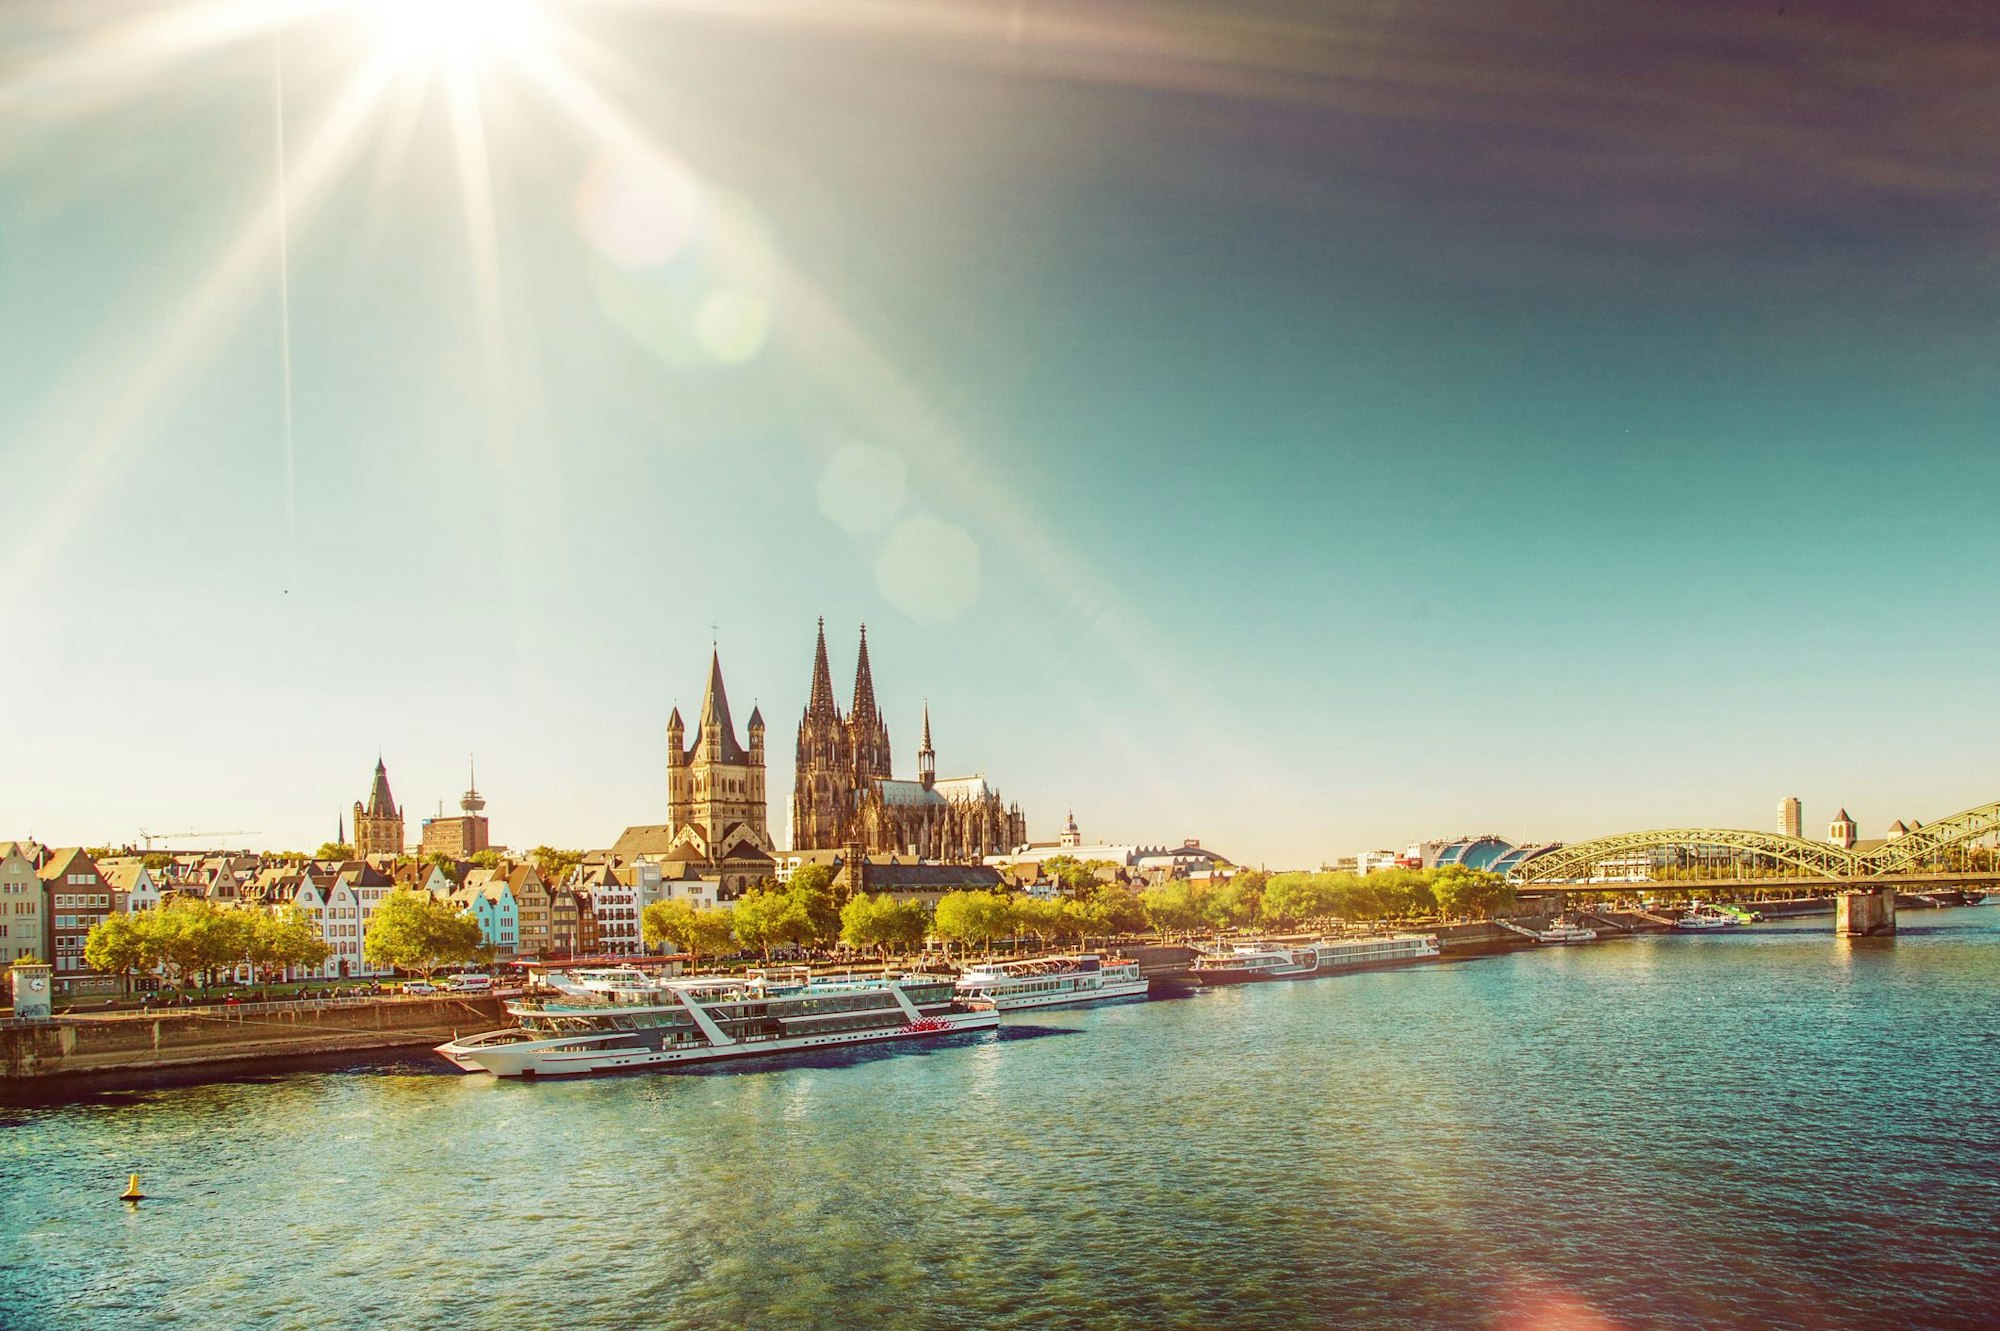 View on the old town of Cologne and Cologne Cathedral with Hohenzollern Bridge and several white passenger boats on the river Rhine on a sunny day in summer